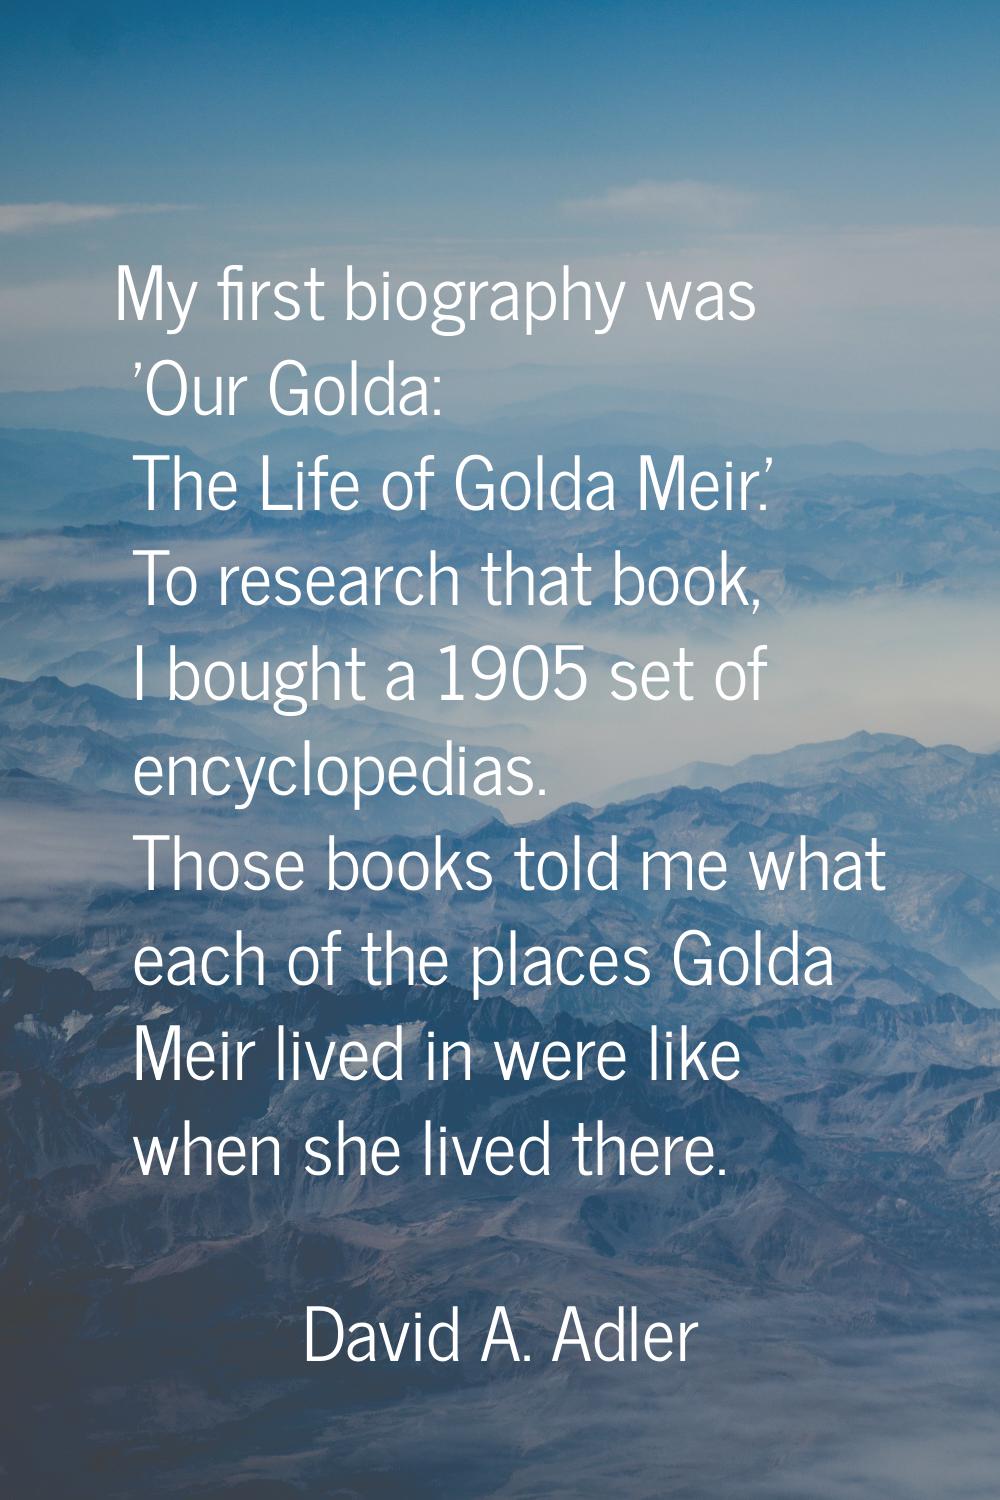 My first biography was 'Our Golda: The Life of Golda Meir.' To research that book, I bought a 1905 